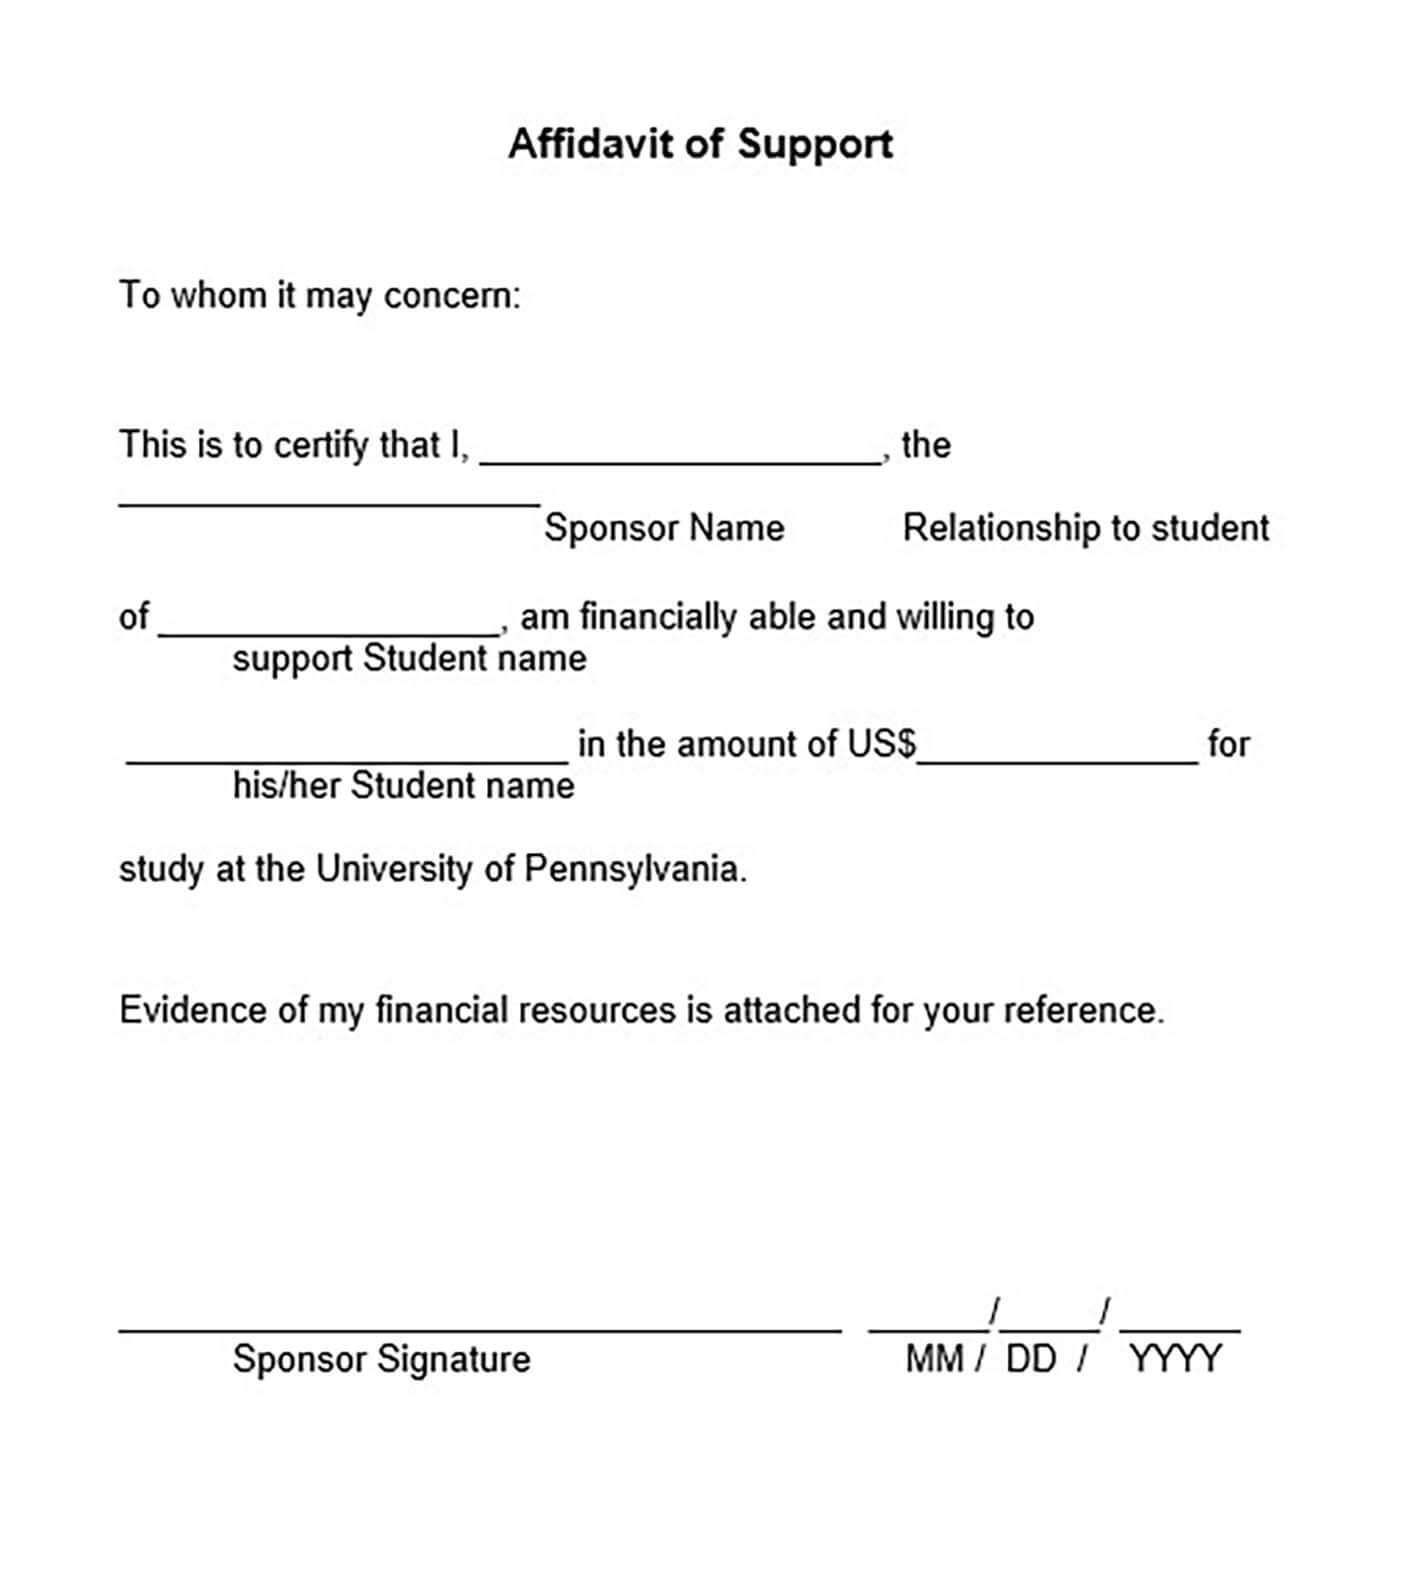 Financial Support Letter Template